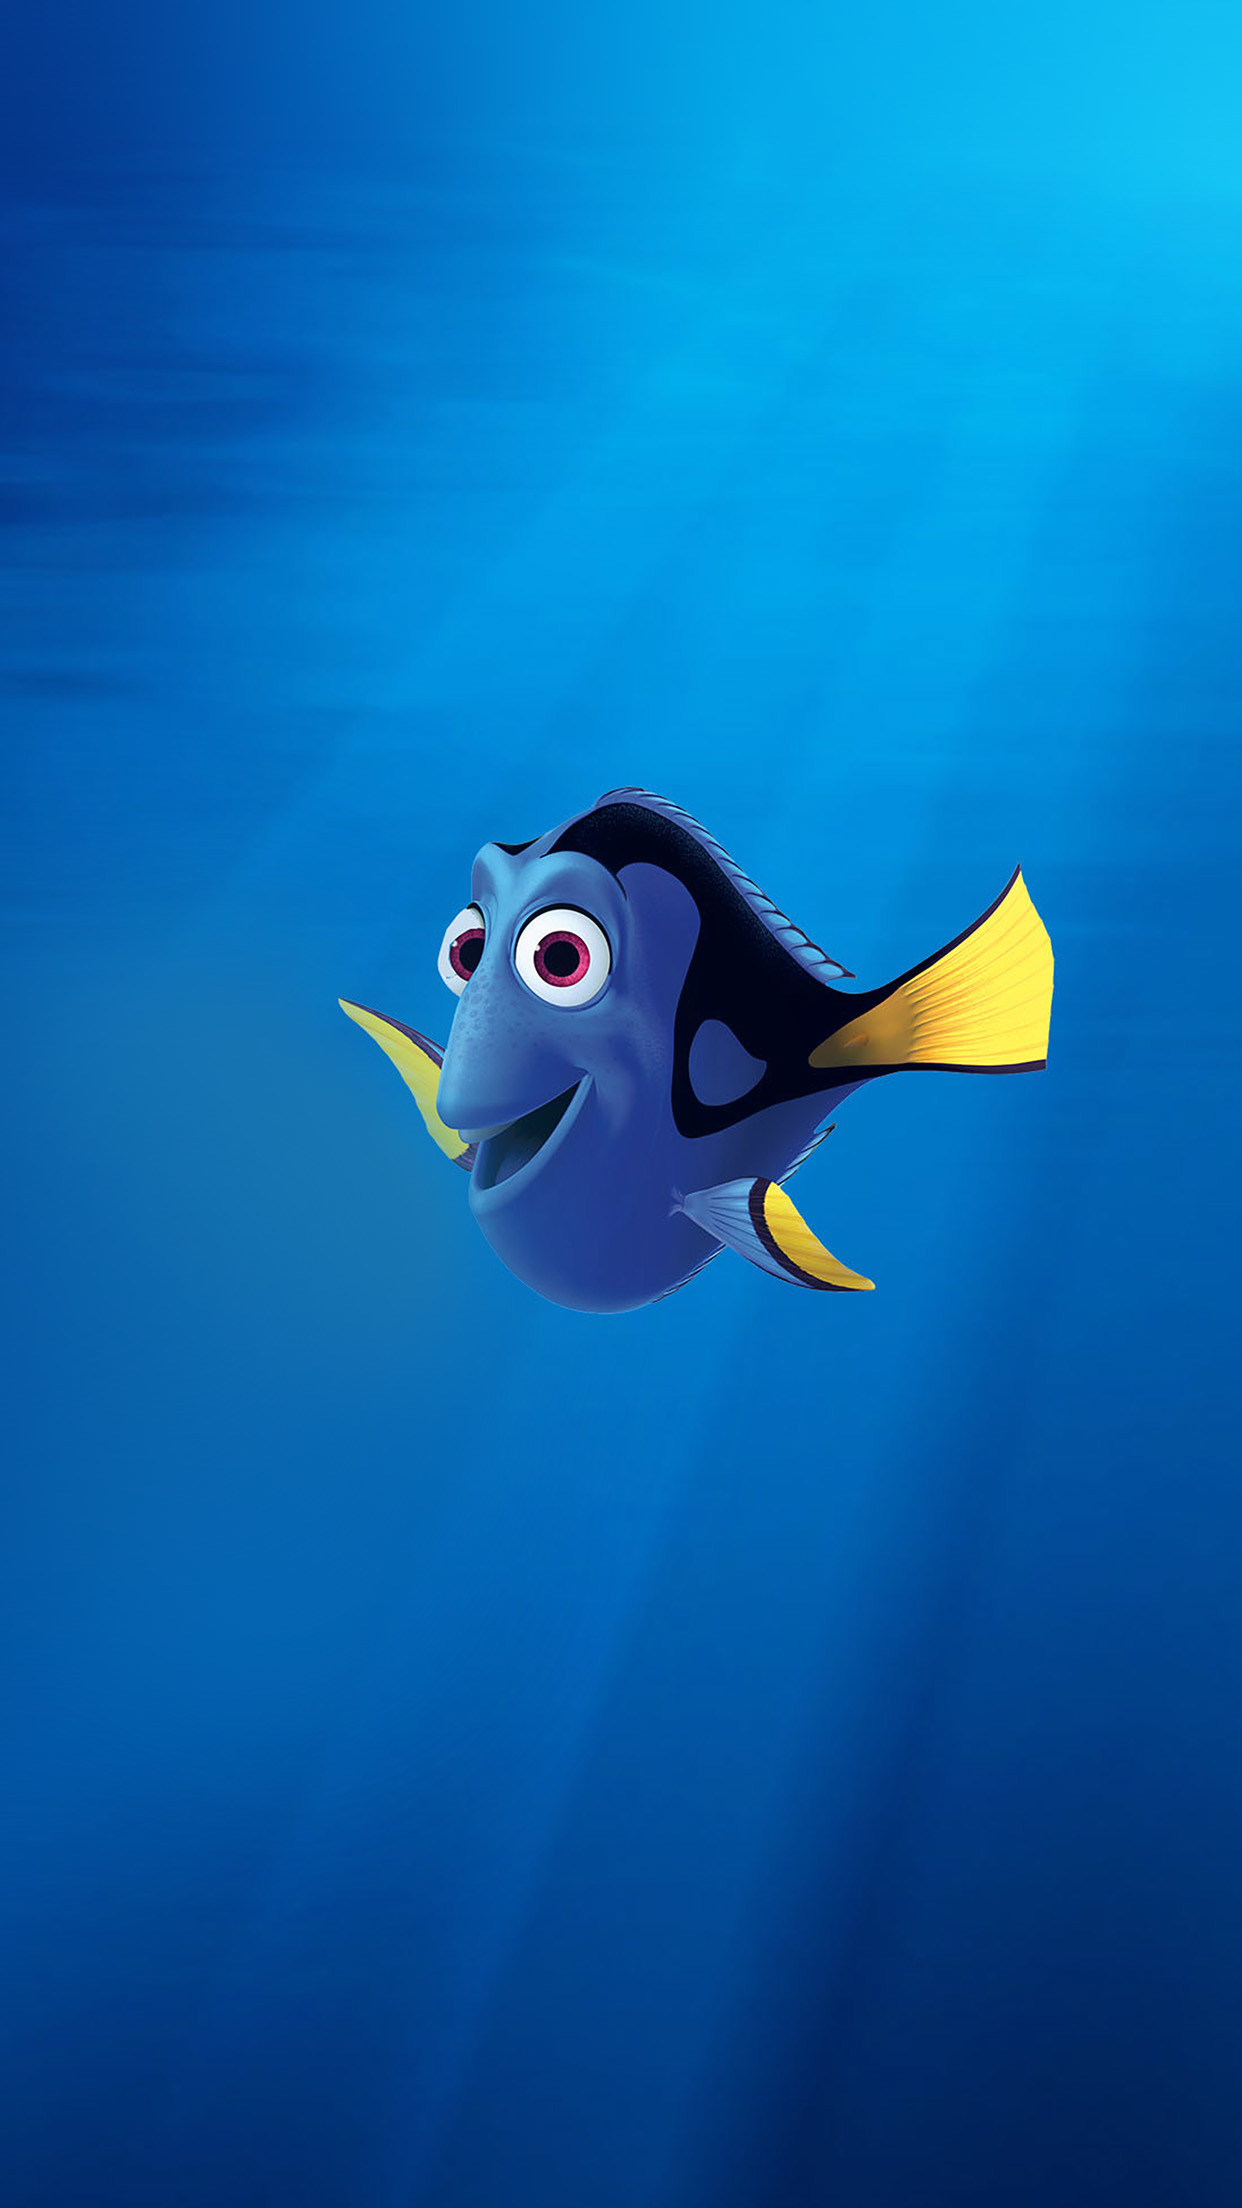 Finding Nemo free download